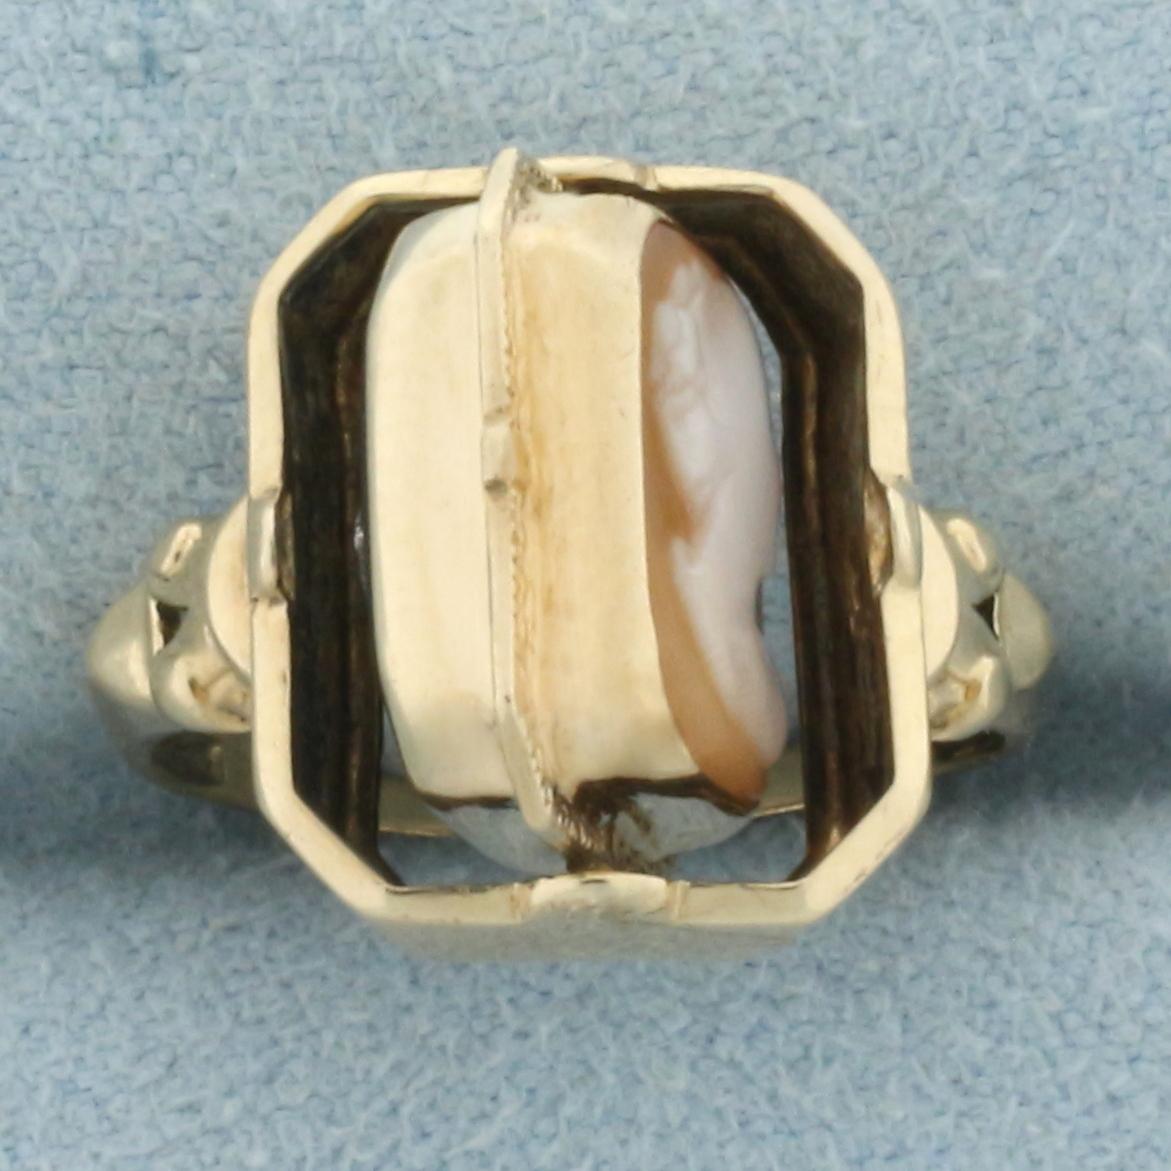 Antique Spinning Shell Carved Cameo And Onyx/diamond Ring In 14k Yellow Gold